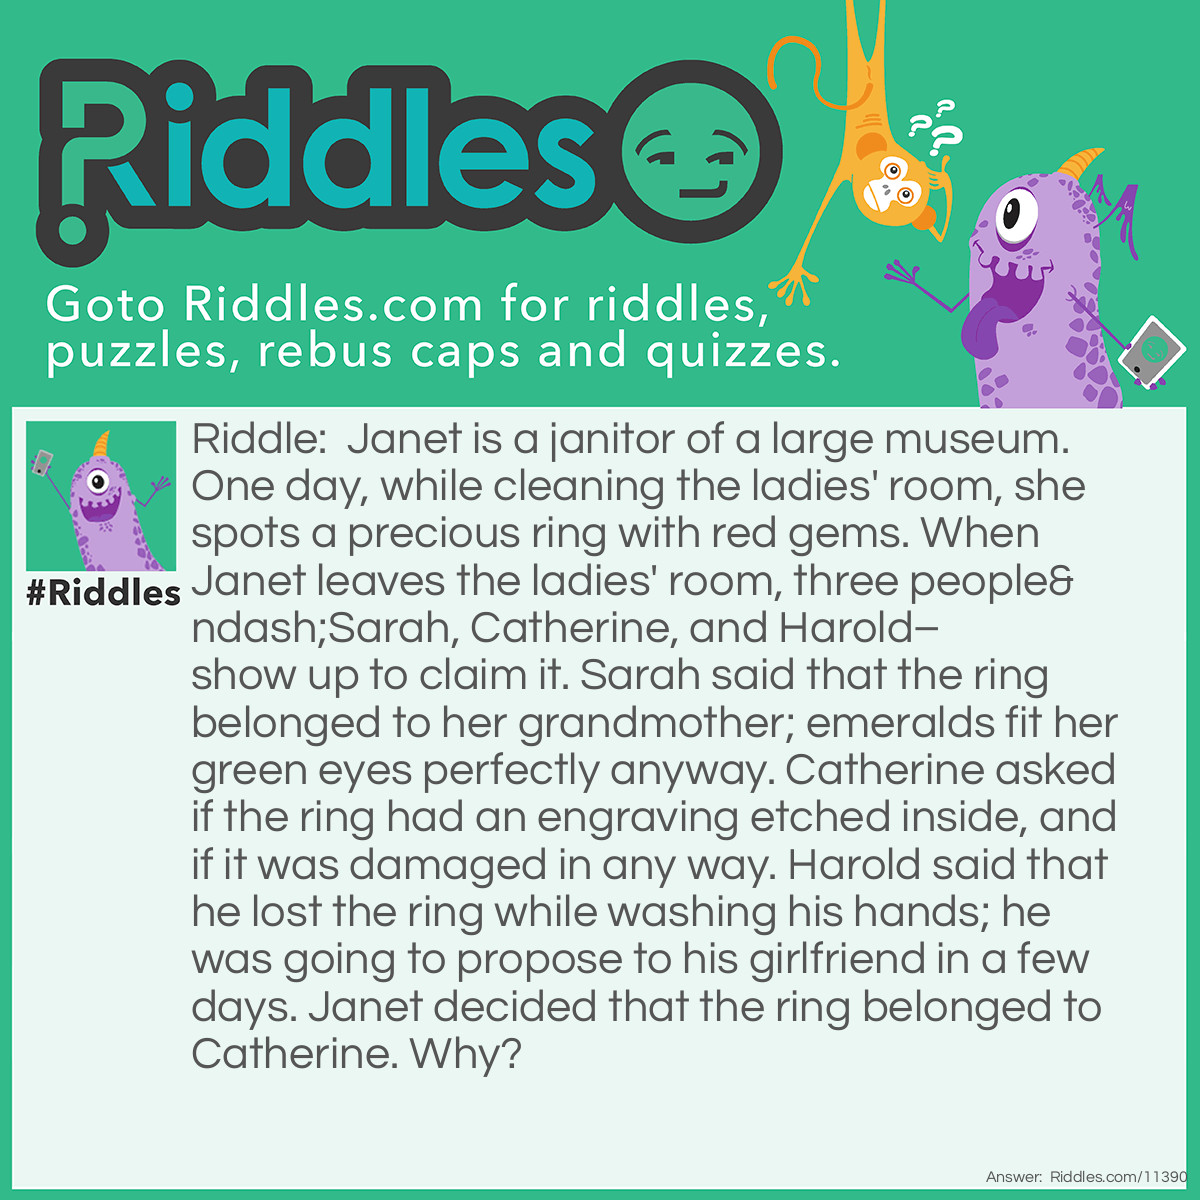 Riddle: Janet is a janitor of a large museum. One day, while cleaning the ladies' room, she spots a precious ring with red gems. When Janet leaves the ladies' room, three people–Sarah, Catherine, and Harold–show up to claim it. Sarah said that the ring belonged to her grandmother; emeralds fit her green eyes perfectly anyway. Catherine asked if the ring had an engraving etched inside, and if it was damaged in any way. Harold said that he lost the ring while washing his hands; he was going to propose to his girlfriend in a few days. Janet decided that the ring belonged to Catherine. Why? Answer: If the ring belonged to Sarah, then she wouldn't have mentioned emeralds, because the stones on the ring are red, not green. And Harold wouldn't have been allowed in the ladies' room. Catherine was the only one who knew about the engraving on the ring, as well as how precious it is, so the ring must be hers.